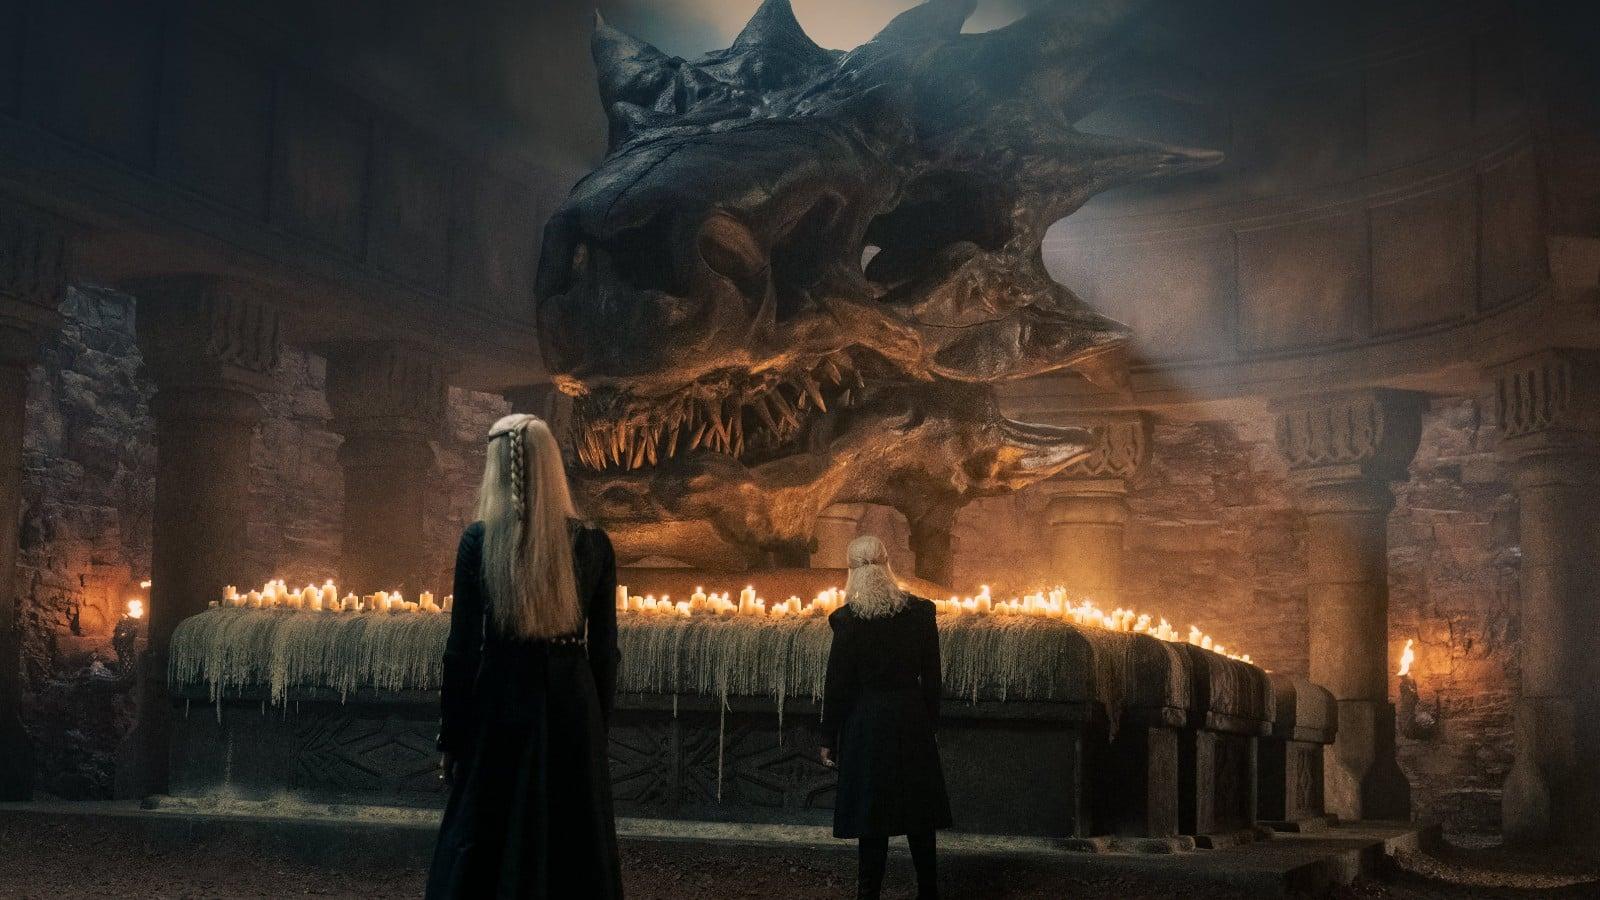 A still from House of the Dragon in the "Song of Ice and Fire" scene.